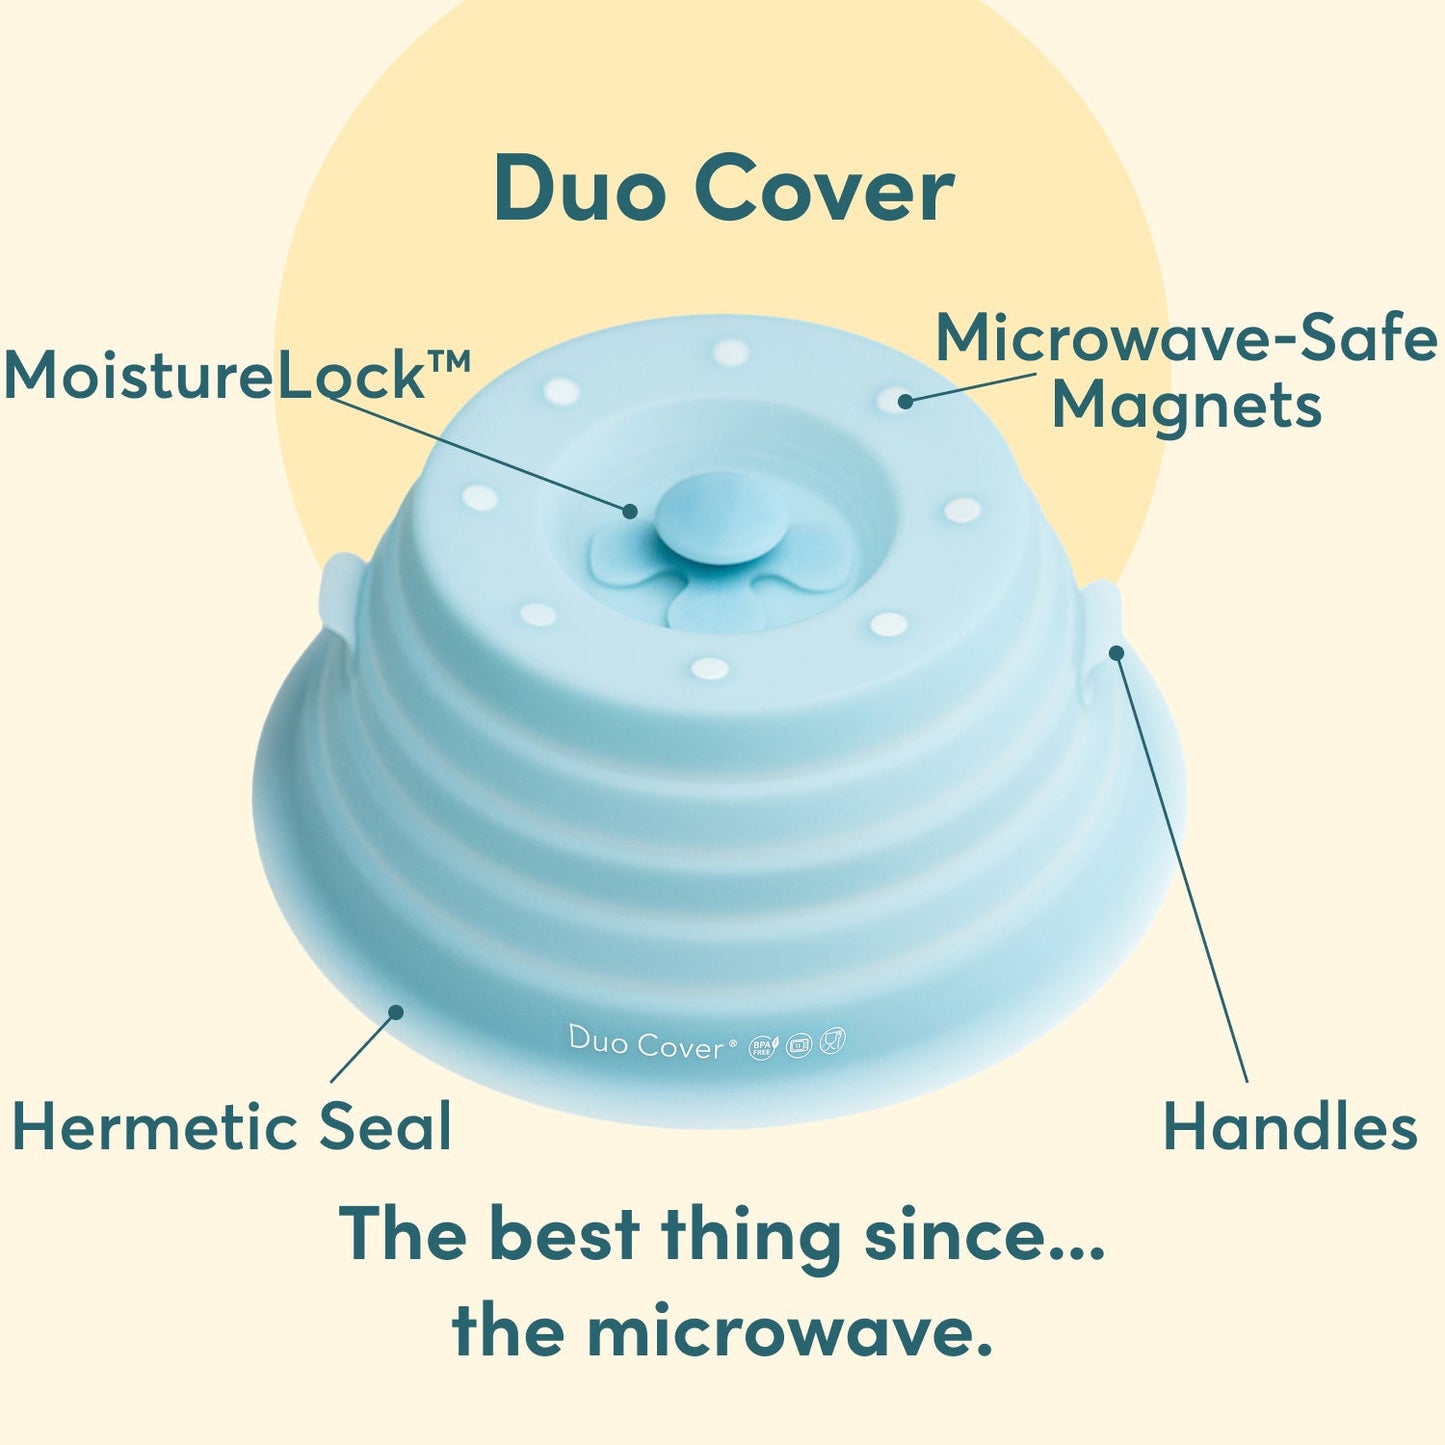 Duo Cover is packed full of features. Here's a taste: moisture lock, microwave-safe magnets, hermetic seal, handles and so much more!